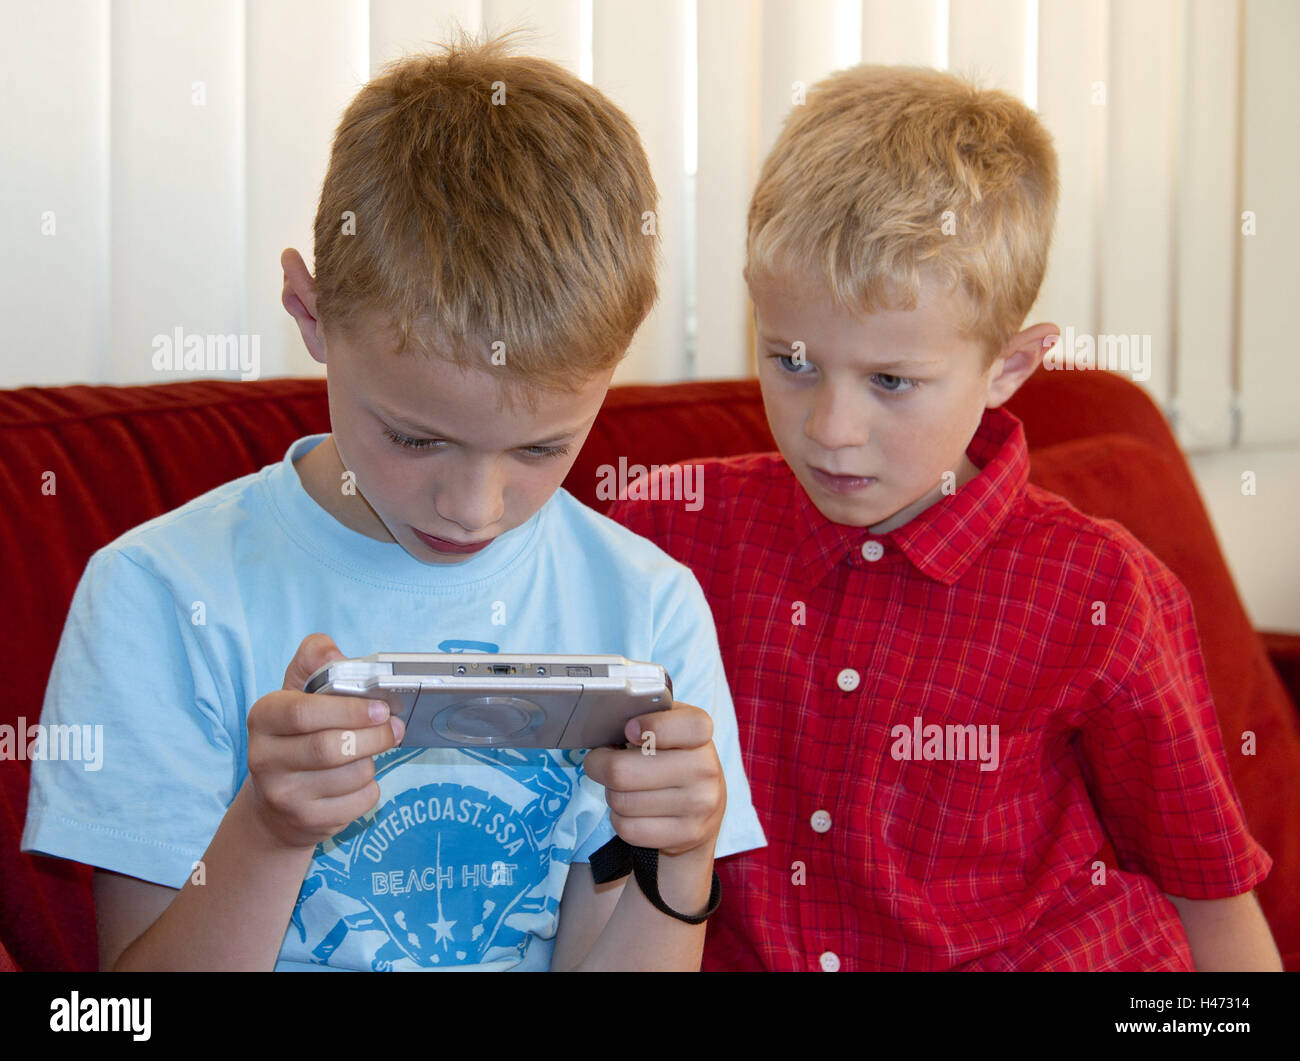 Boys, two, game console, play, concentration, brothers, boys, siblings, Gameboy, children, boys, people, side by side, manly, PSP, excitingly, voltage, game, game console, portrait, Stock Photo